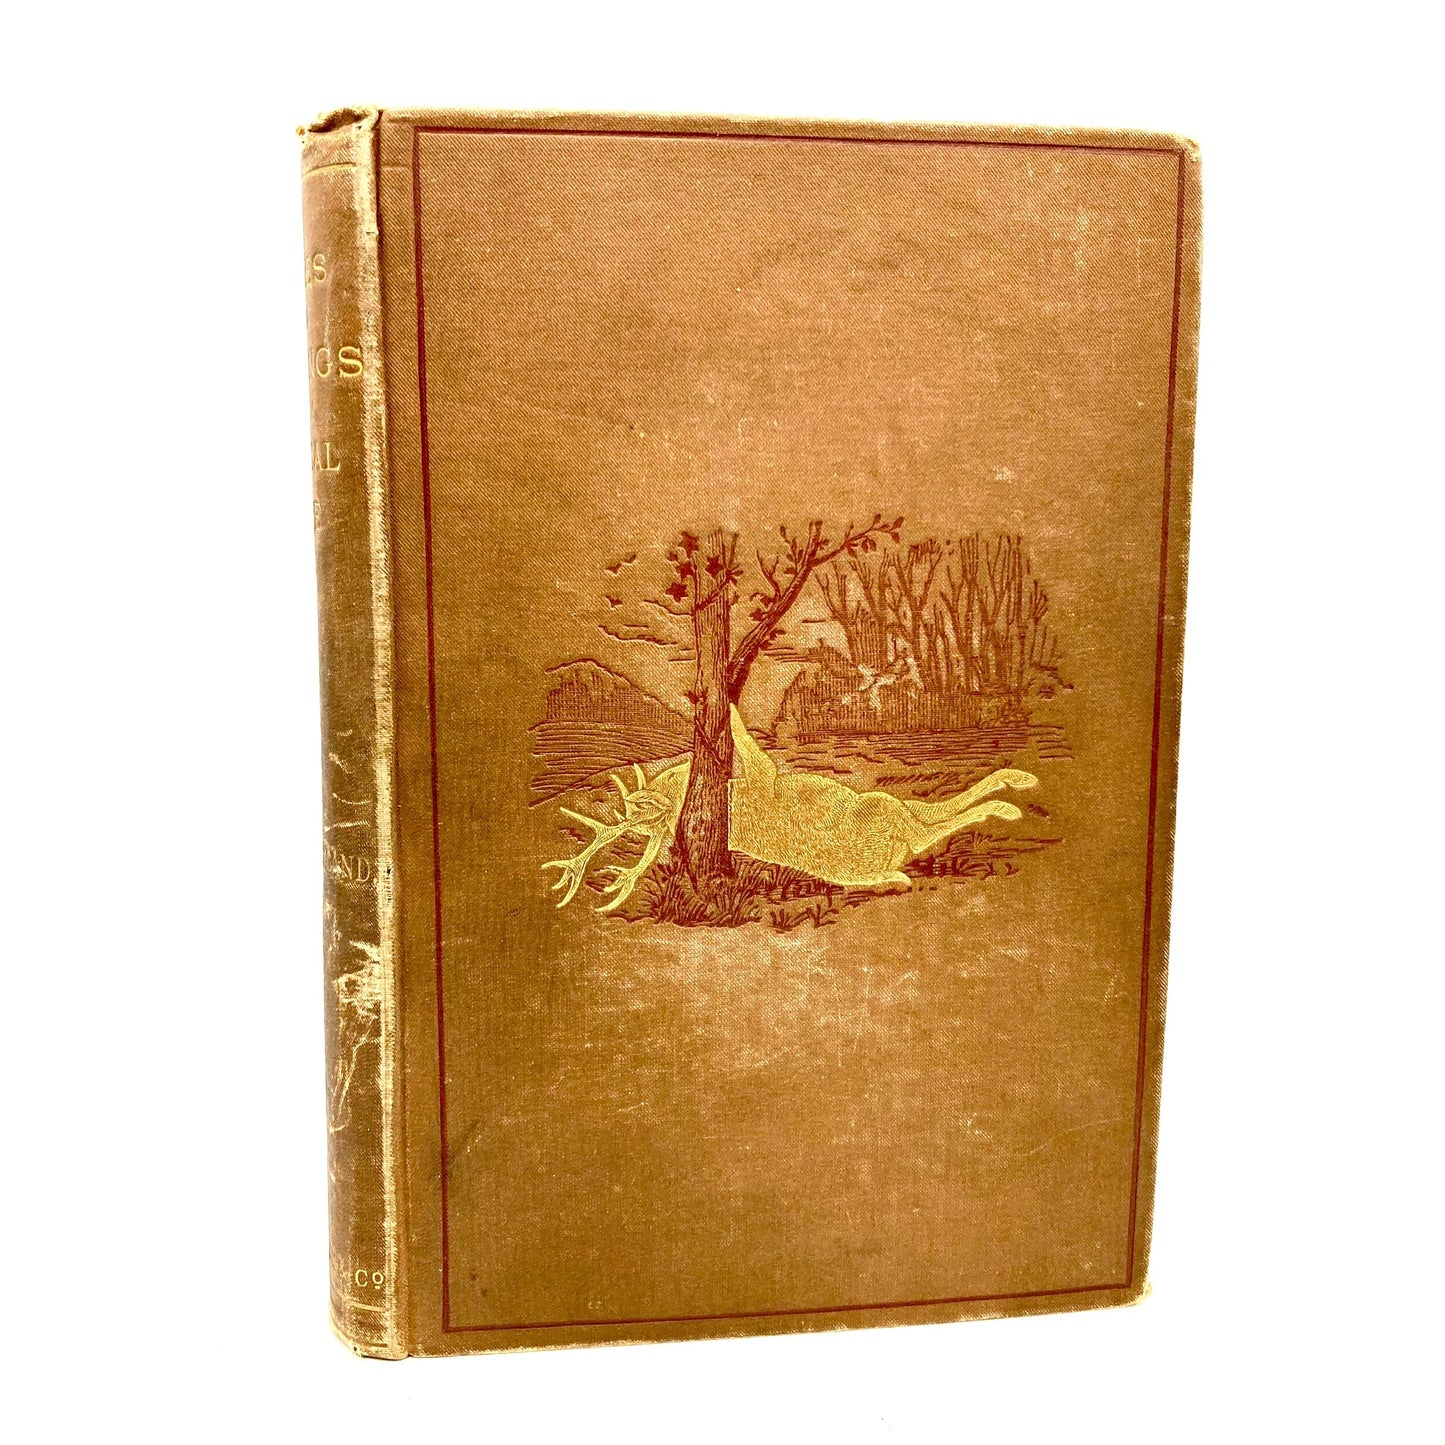 BUCKLAND, Frank "Notes and Jottings from Animal Life" [Frederick Warne, 1890] - Buzz Bookstore